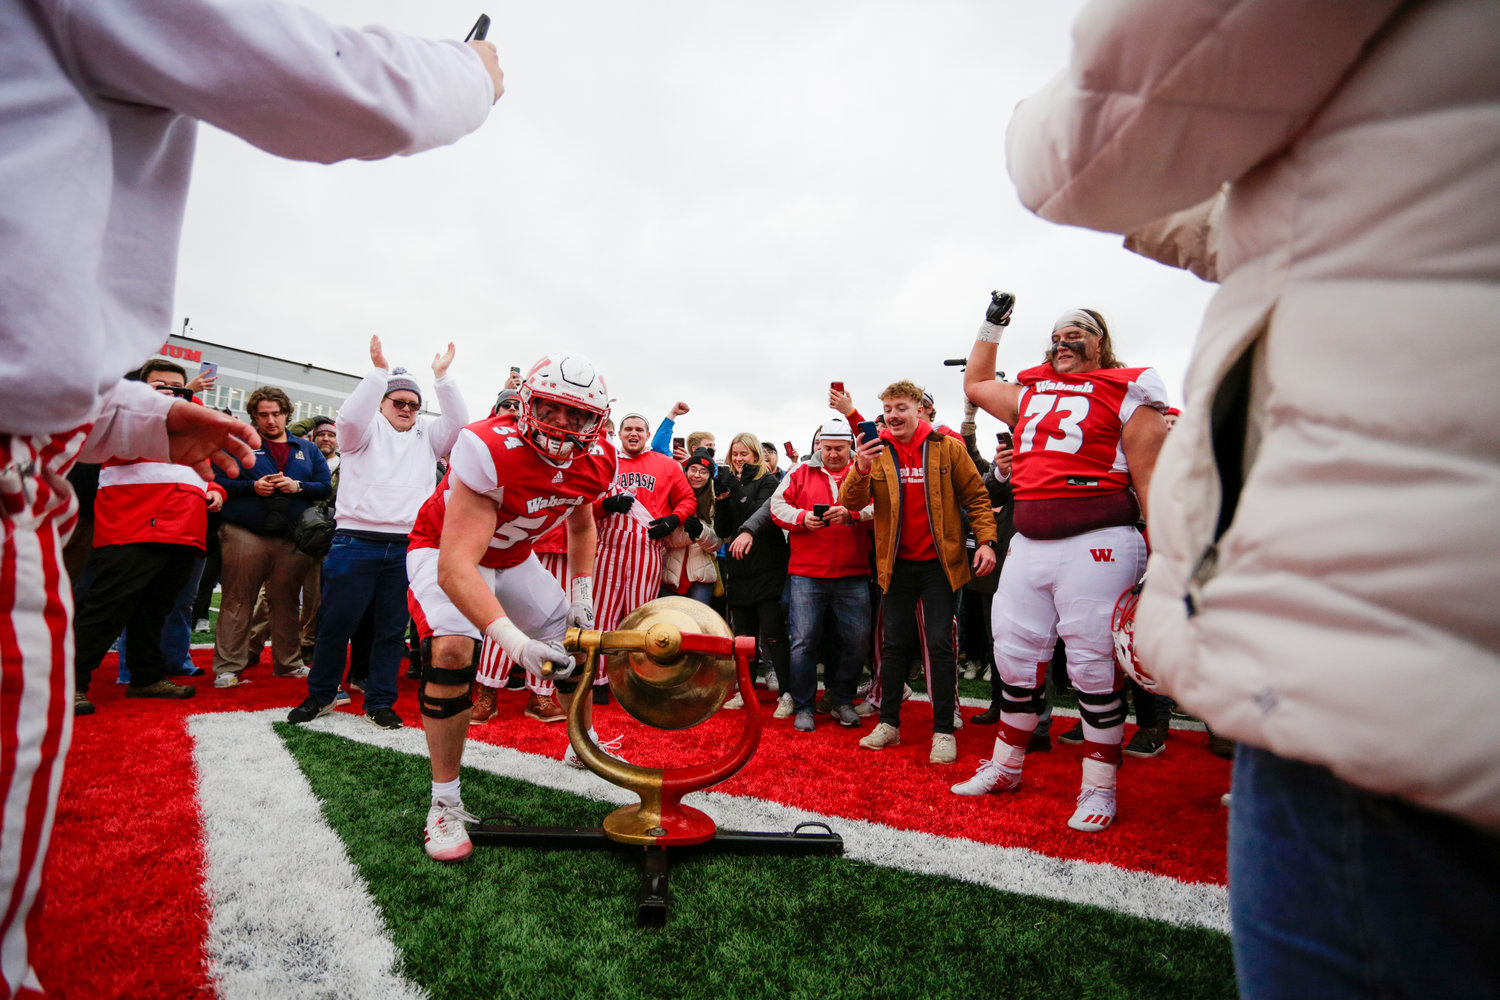 Wabash outscored DePauw 42-14 after being down 21-0 in the first quarter to win the 127th annual Monon Bell Calssic in front of a sold out crowd of 8,400 people in the new Little Giant Stadium